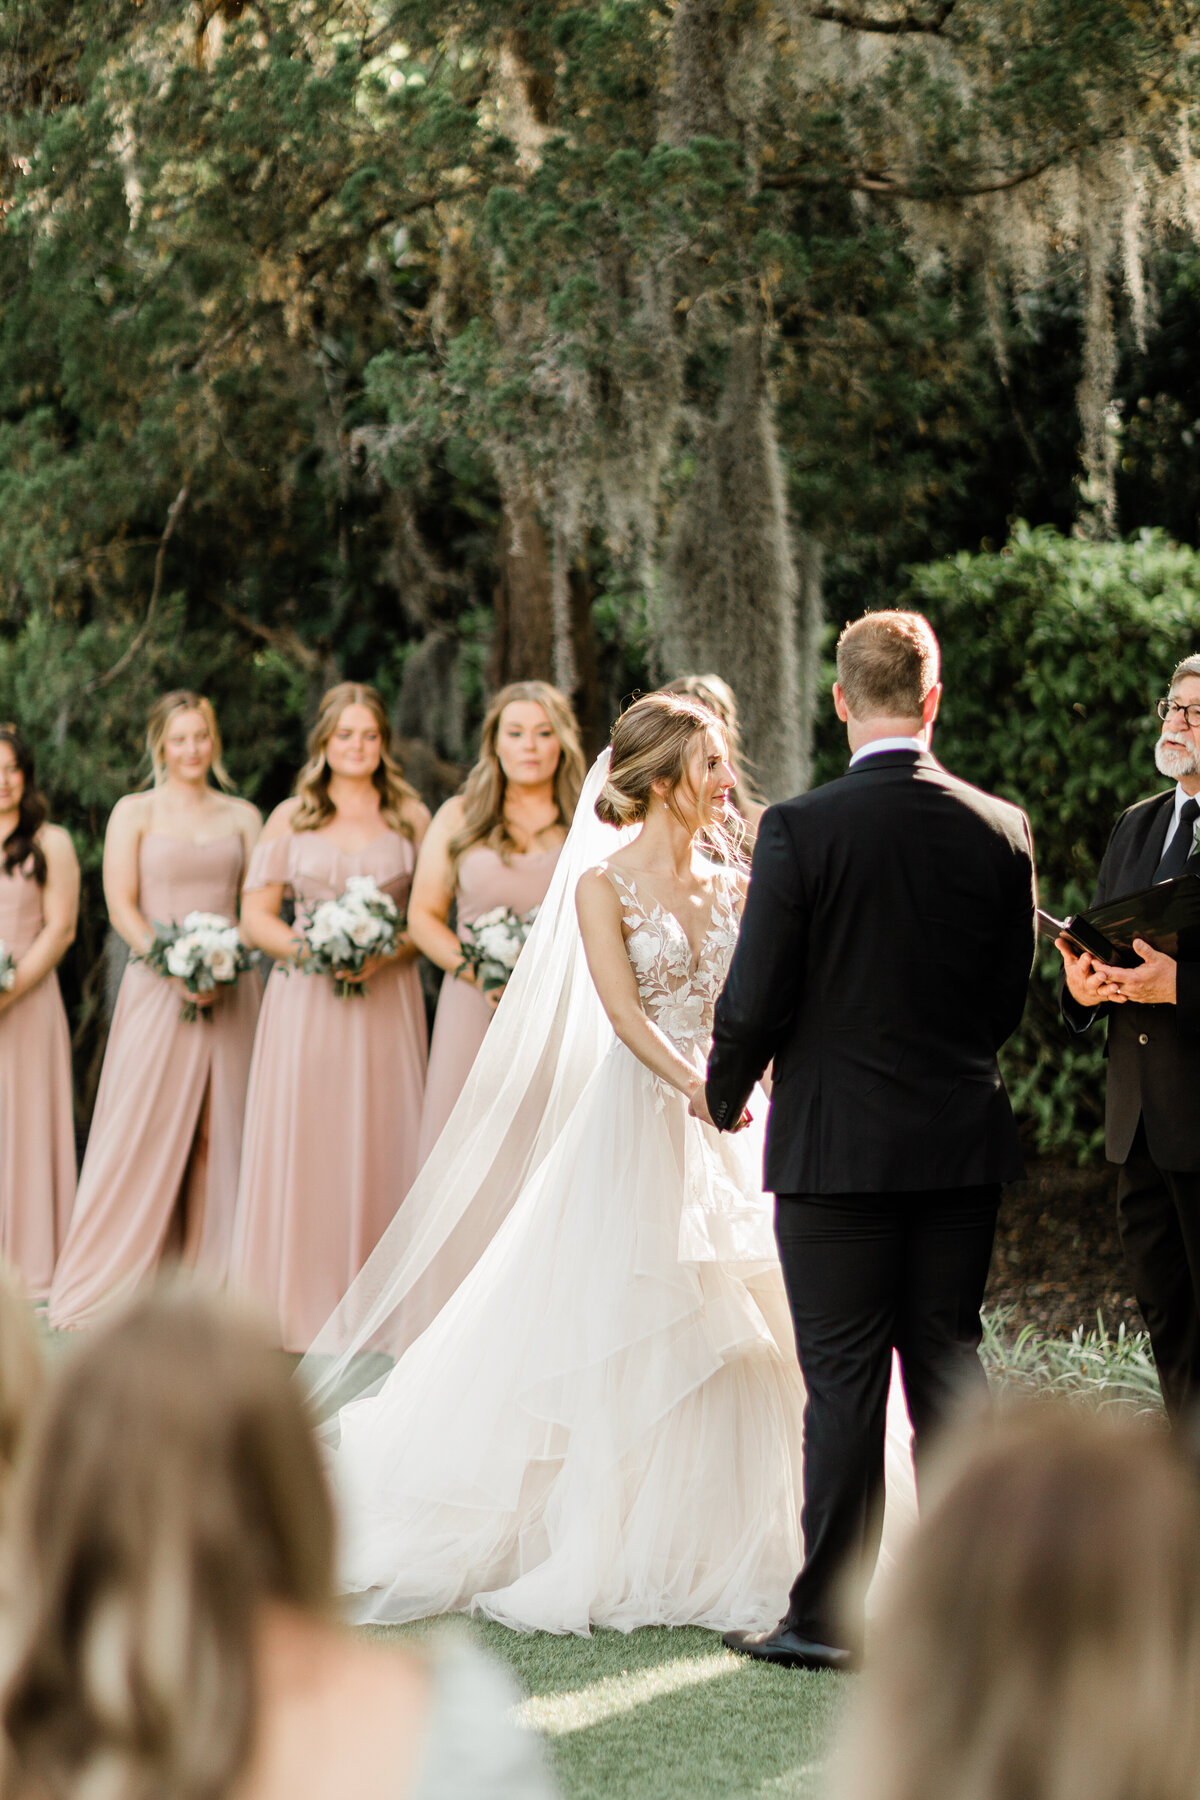 This stunning wedding ceremony really shows how breathtaking photos can be at Wrightsville Manor in Wrightsville Beach NC.